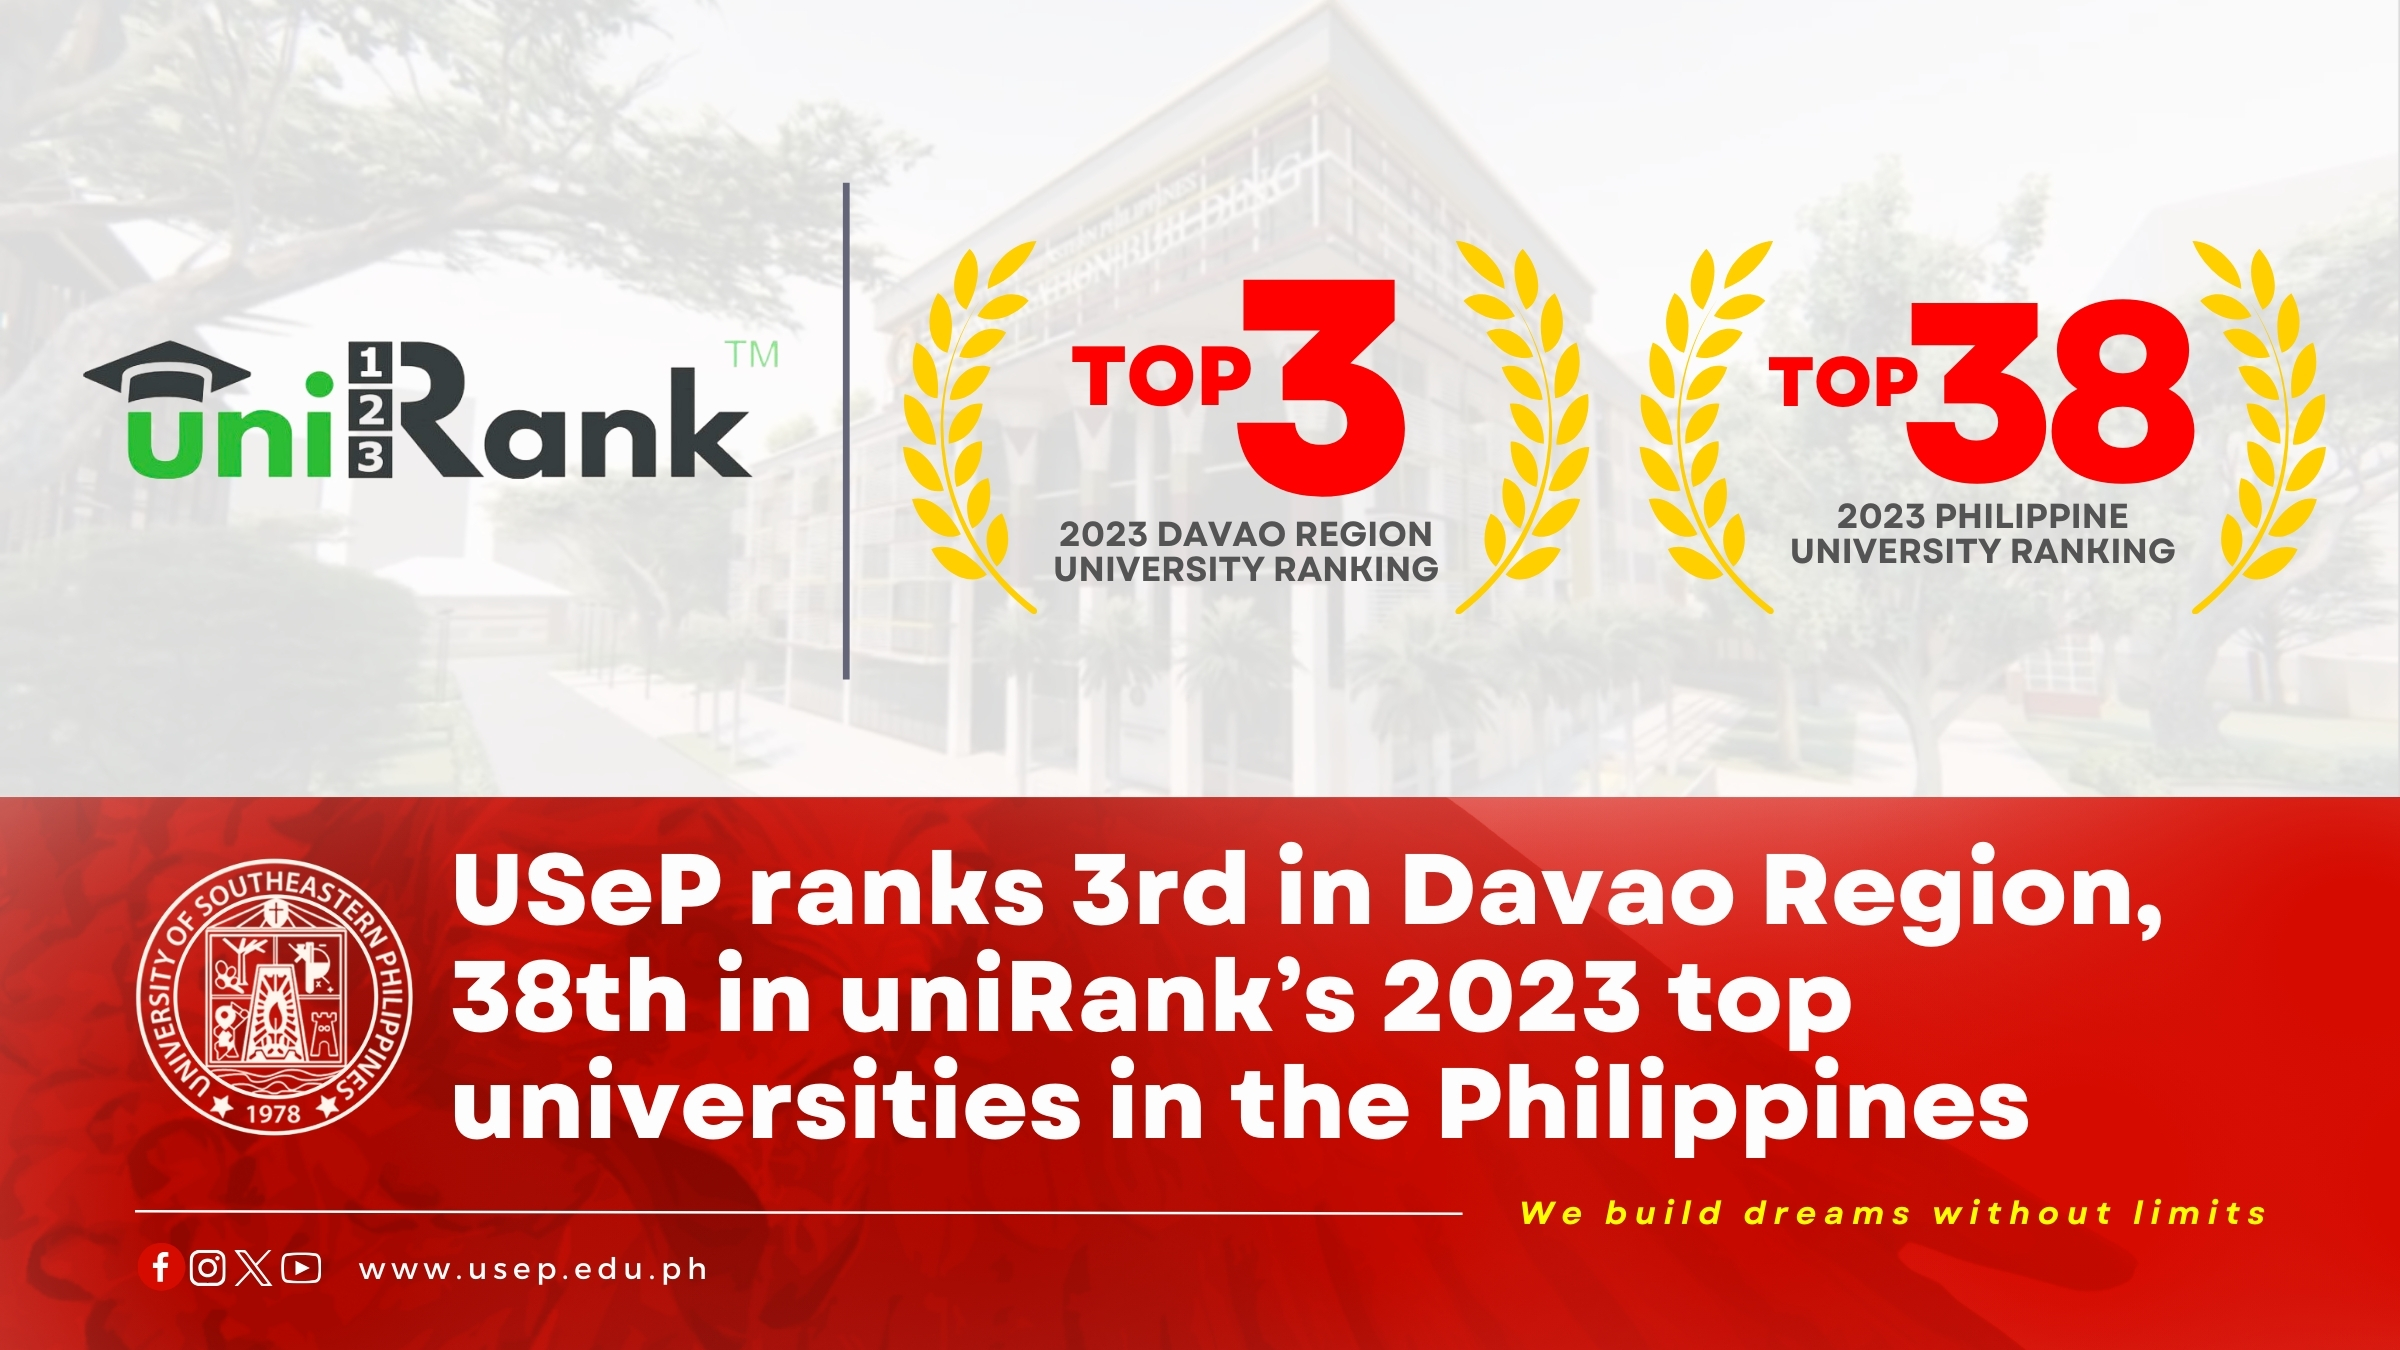 USeP ranks 3rd in Davao Region, 38th in uniRank’s 2023 top universities in the Philippines